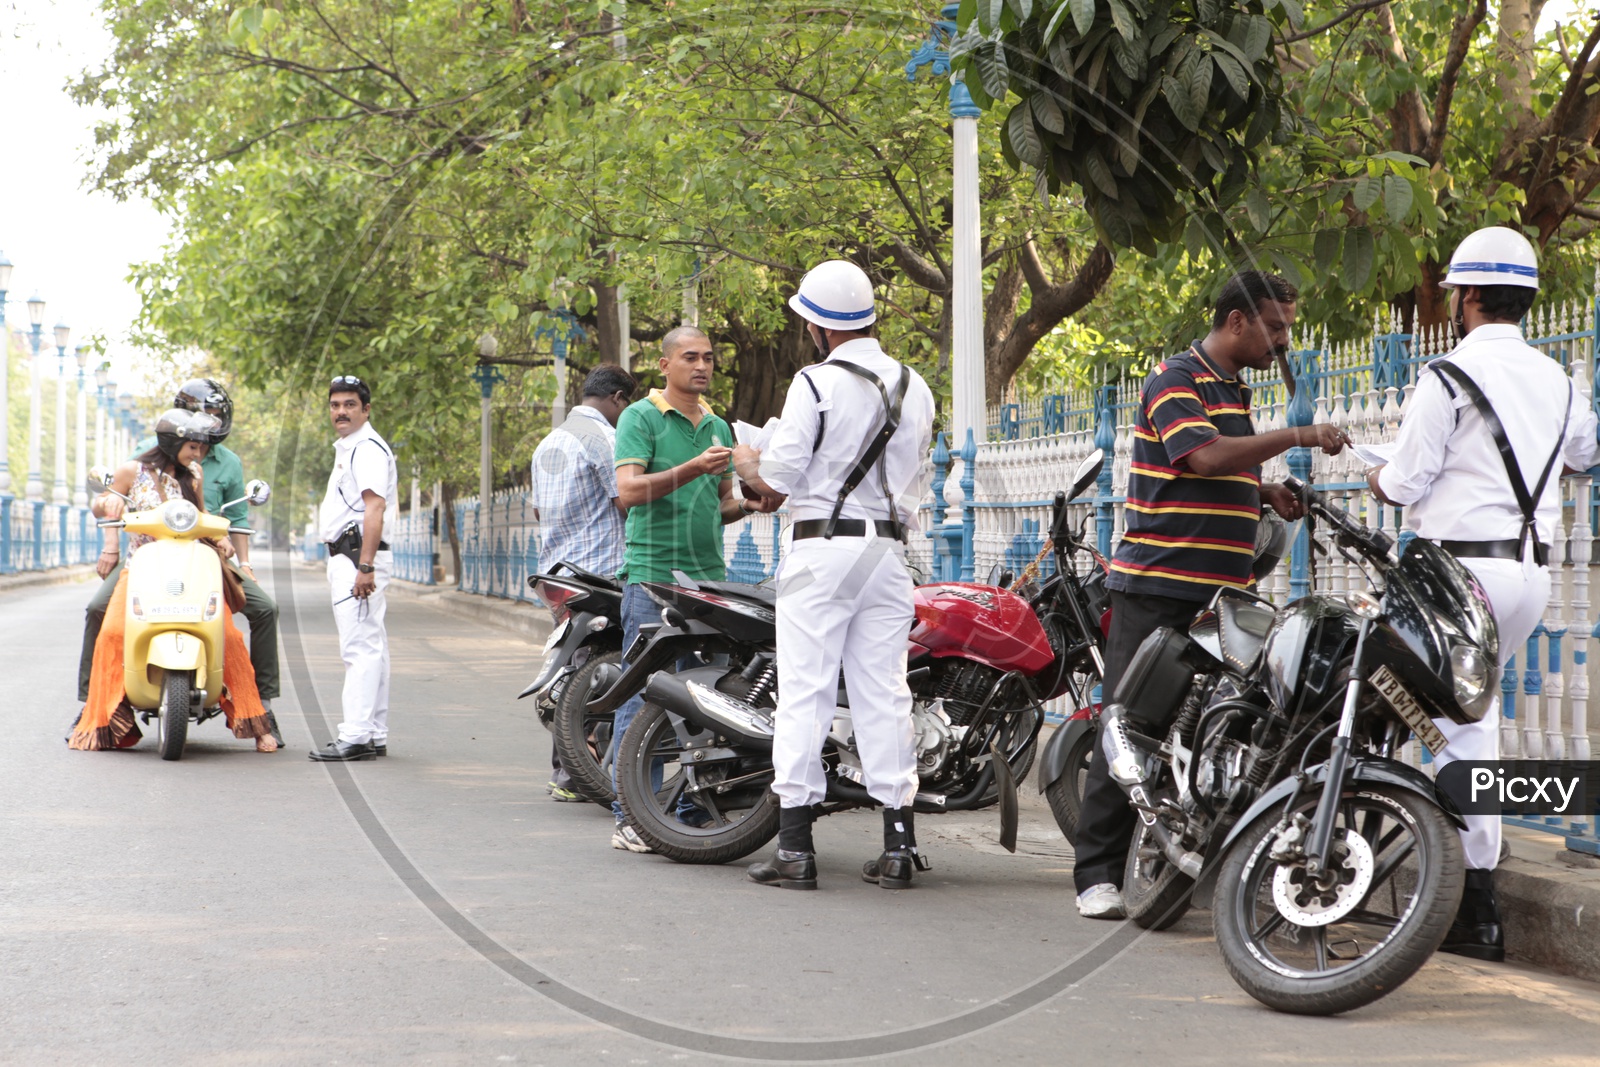 Traffic Police Checking Bike Documents and Licenses